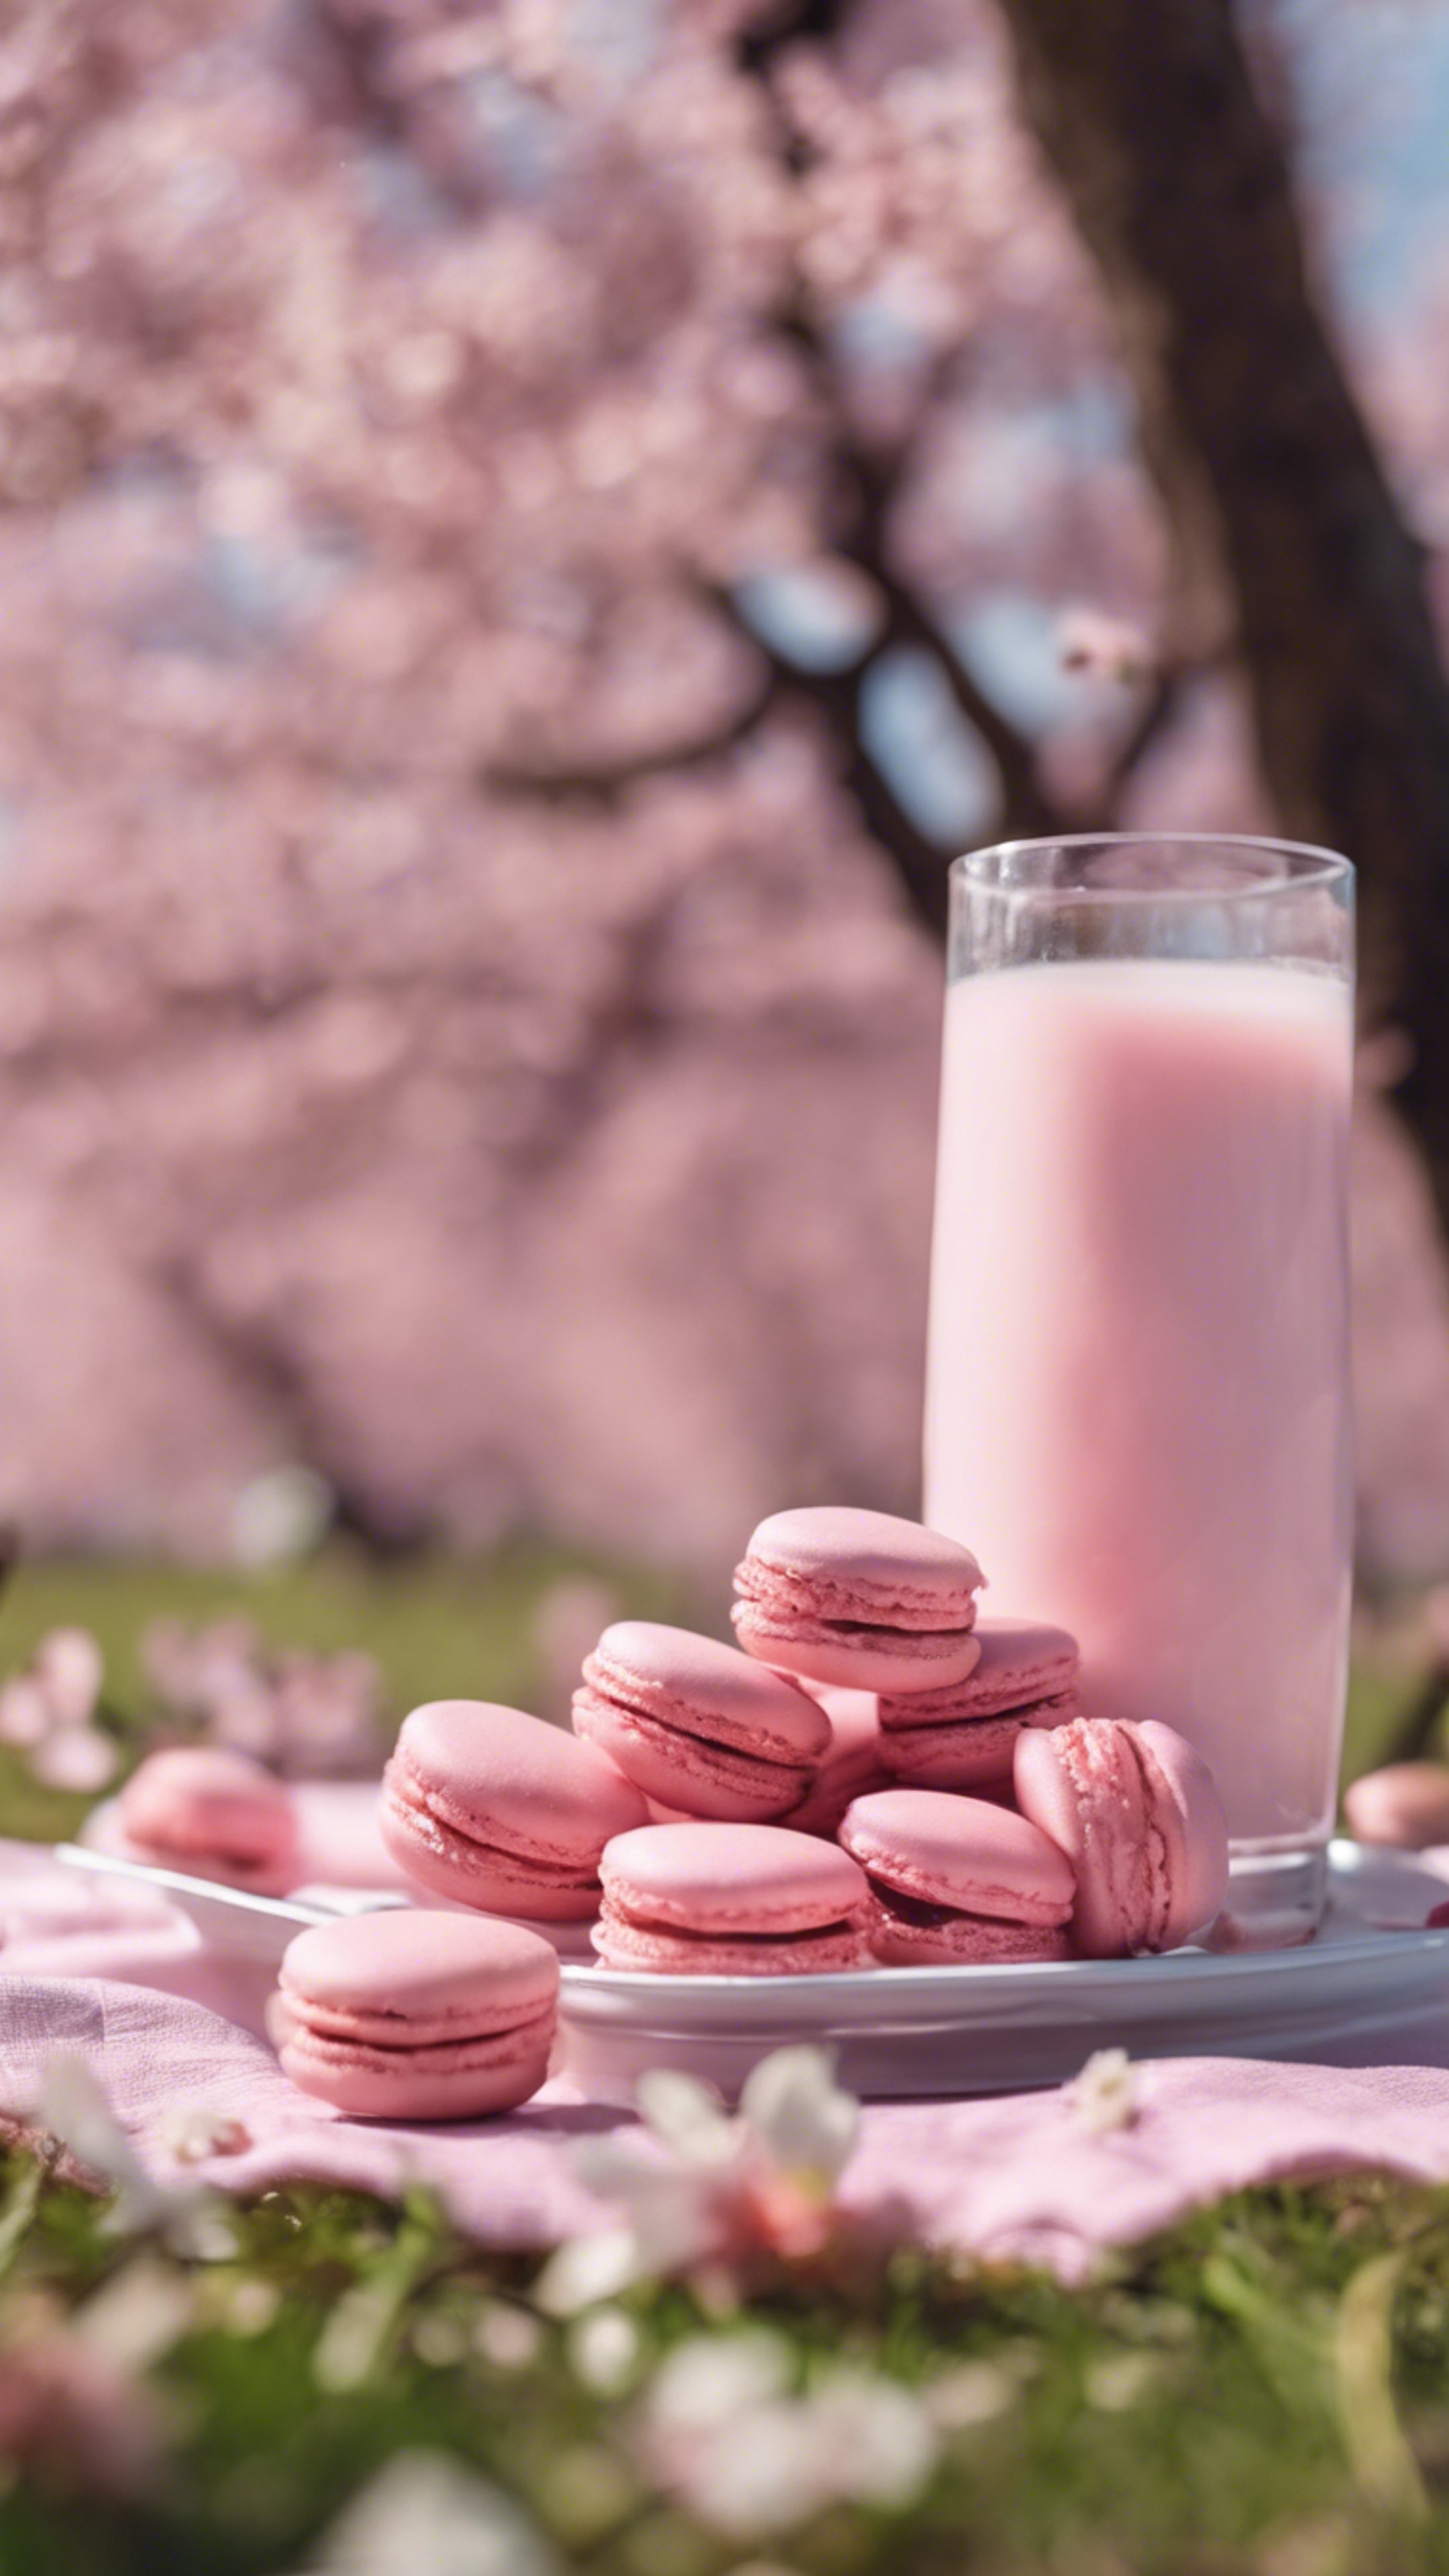 A picnic under the cherry blossoms with pink macaroons and strawberry milk. Tapeta[97540e72ef6b46bcbaa8]